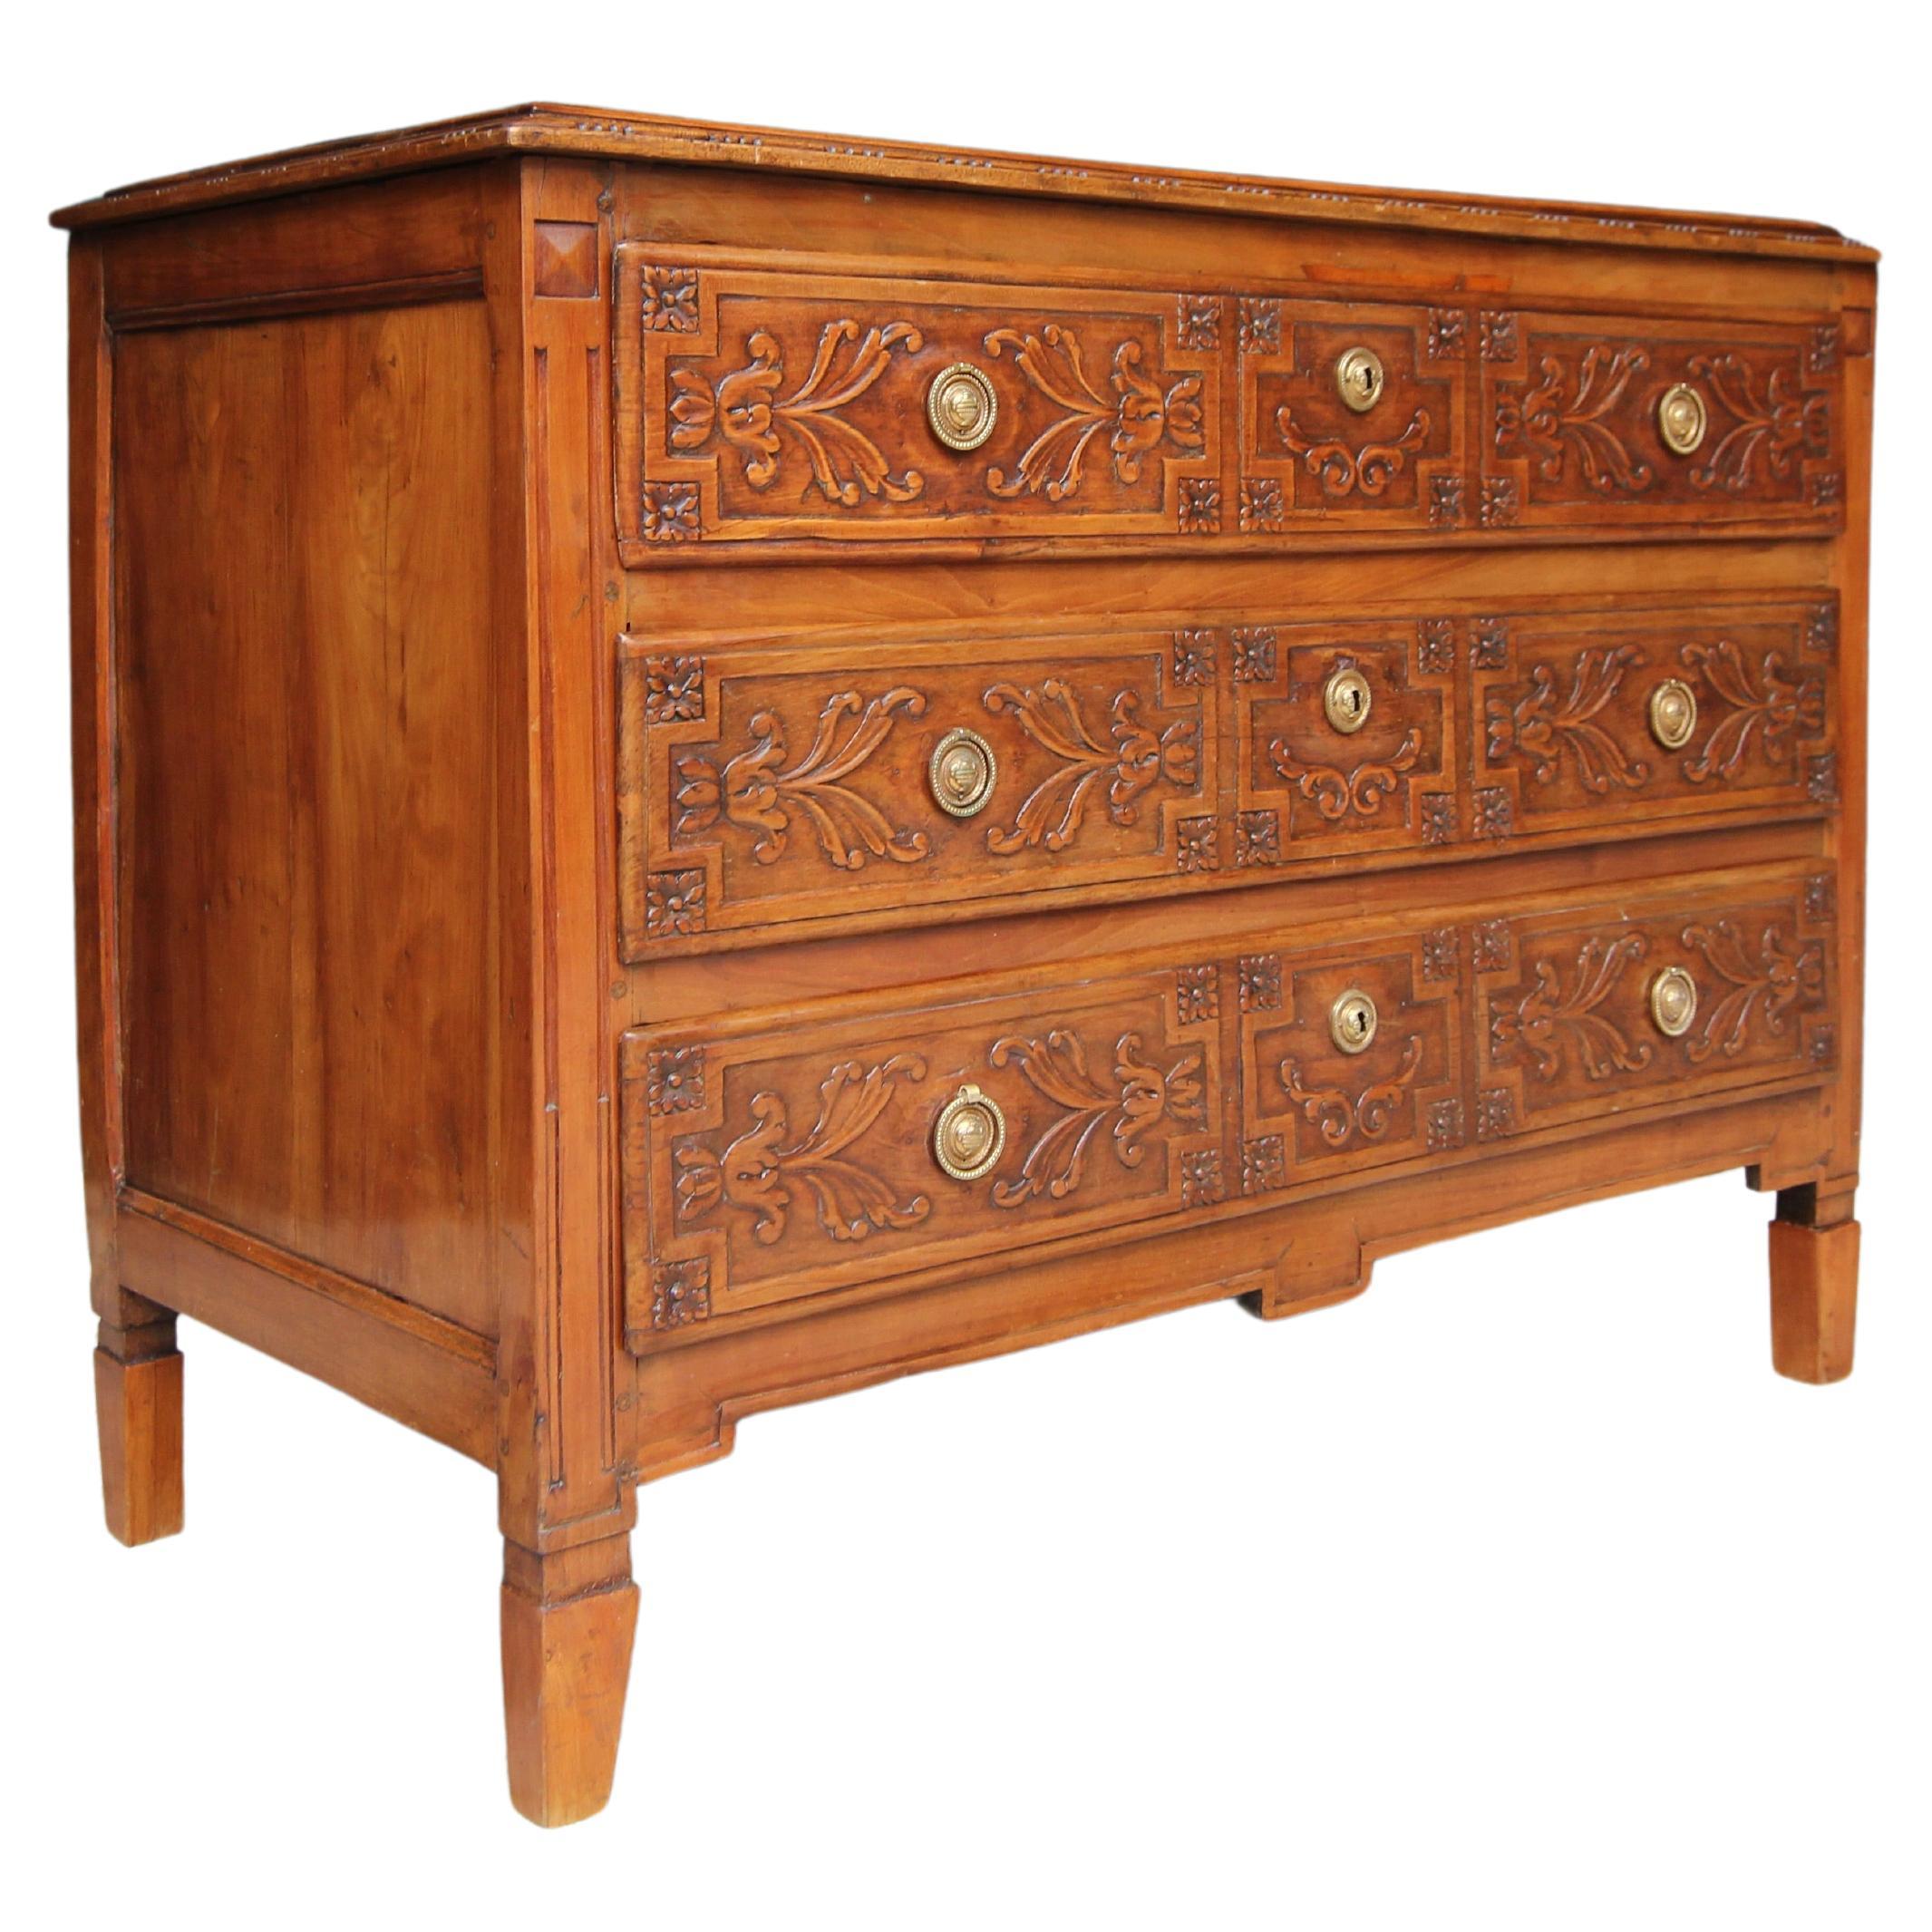 Early 19th Century Louis XVI Style Cherry Wood Chest of Drawers For Sale